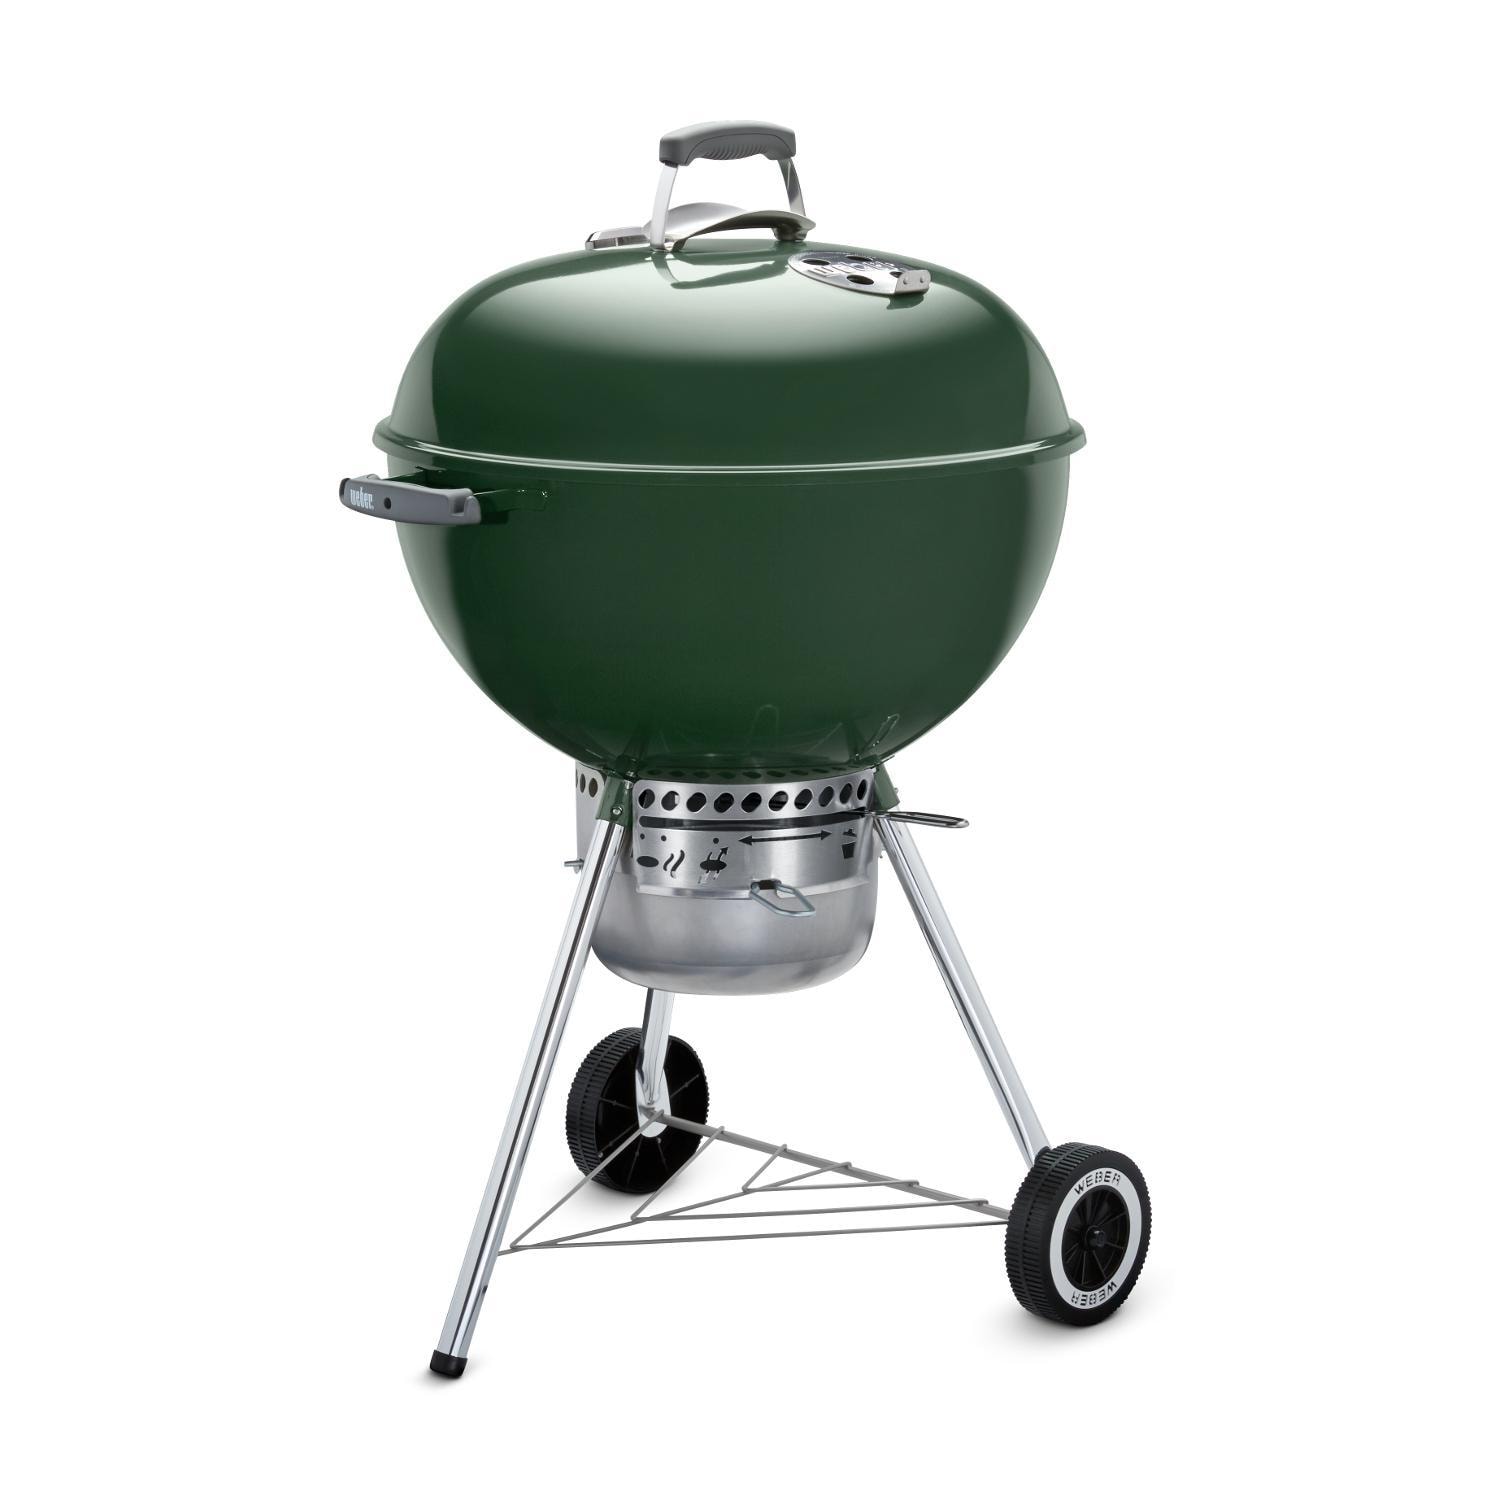 Weber Original Kettle Premium 22-Inch Charcoal Grill - Green - 14407001 - image 1 of 6